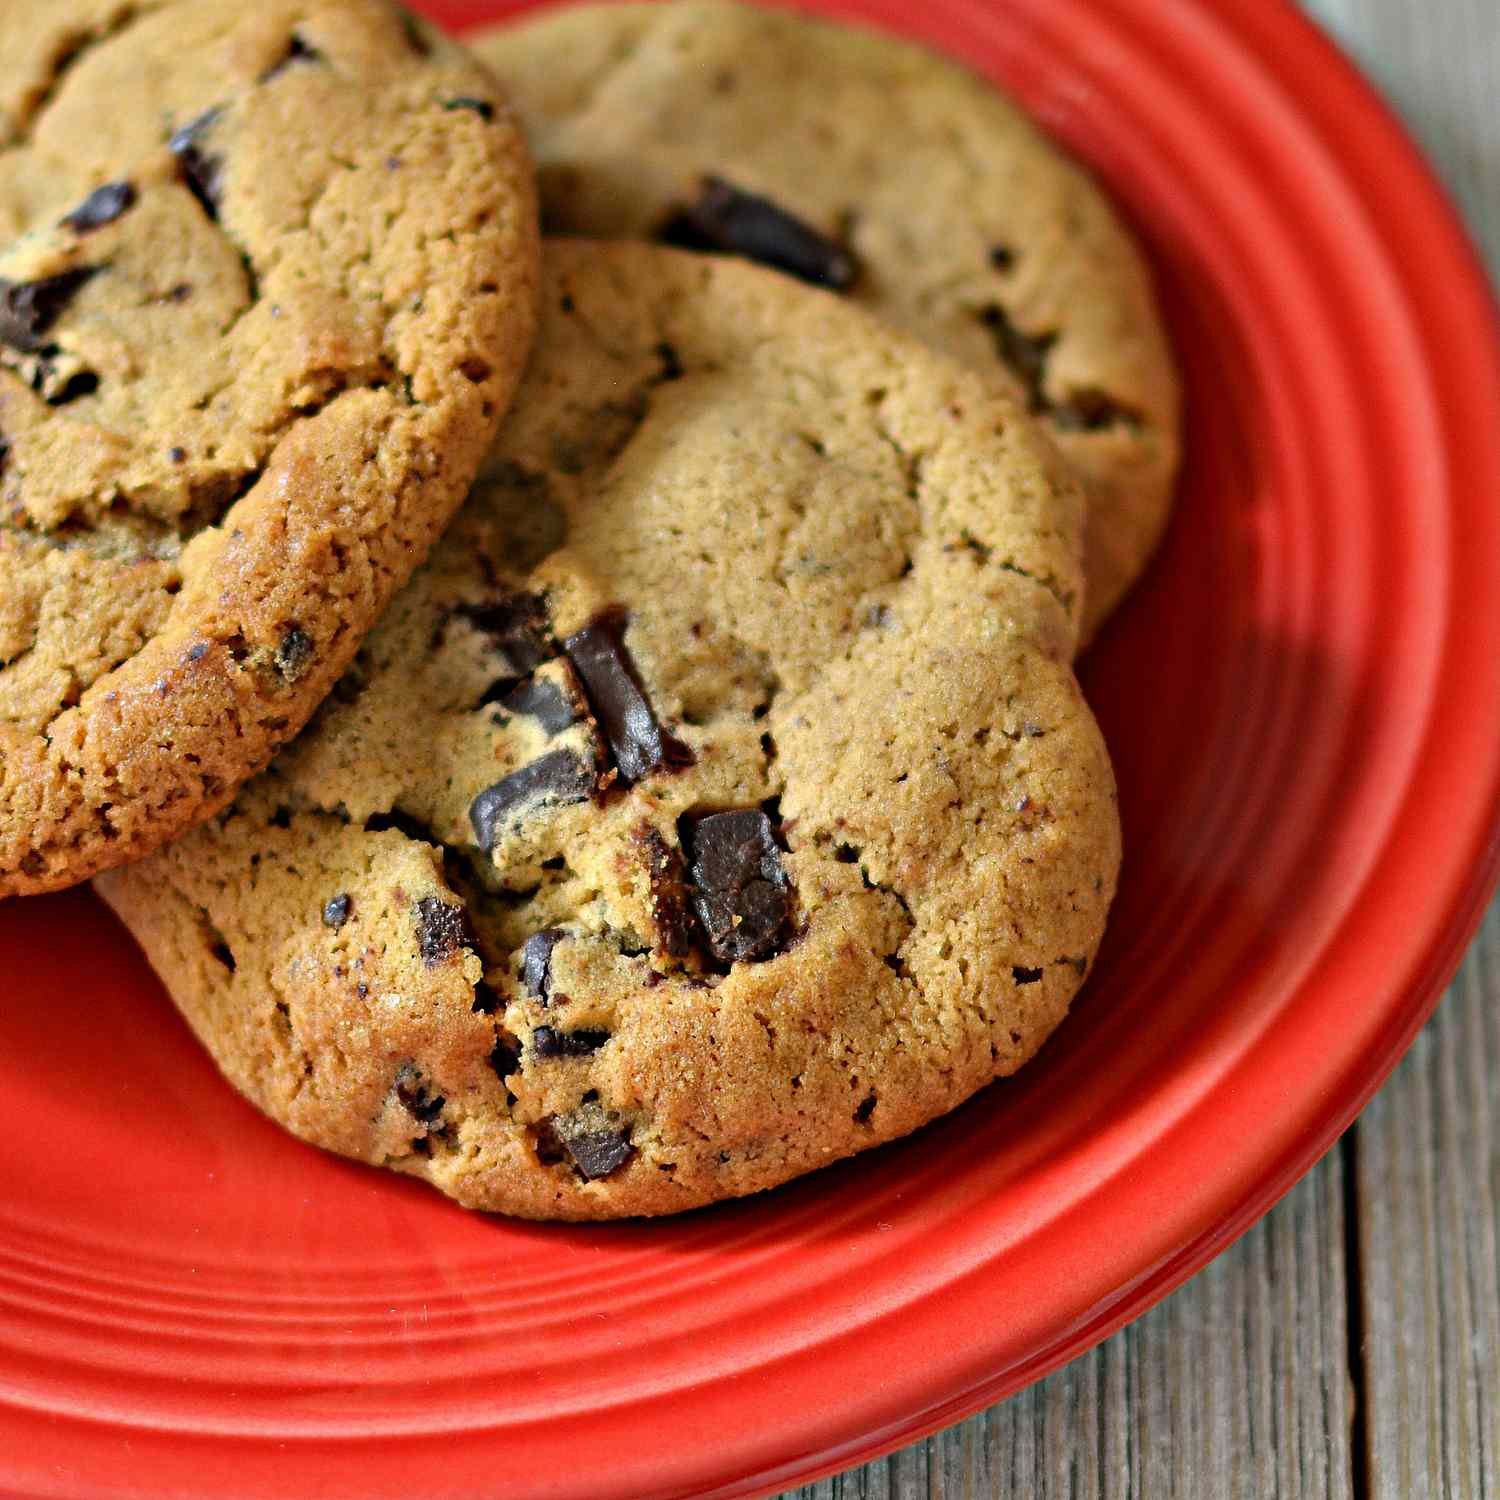 Our 25 Best Chocolate Chip Cookie Recipes of All Time Give You 25 Twists on a Classic